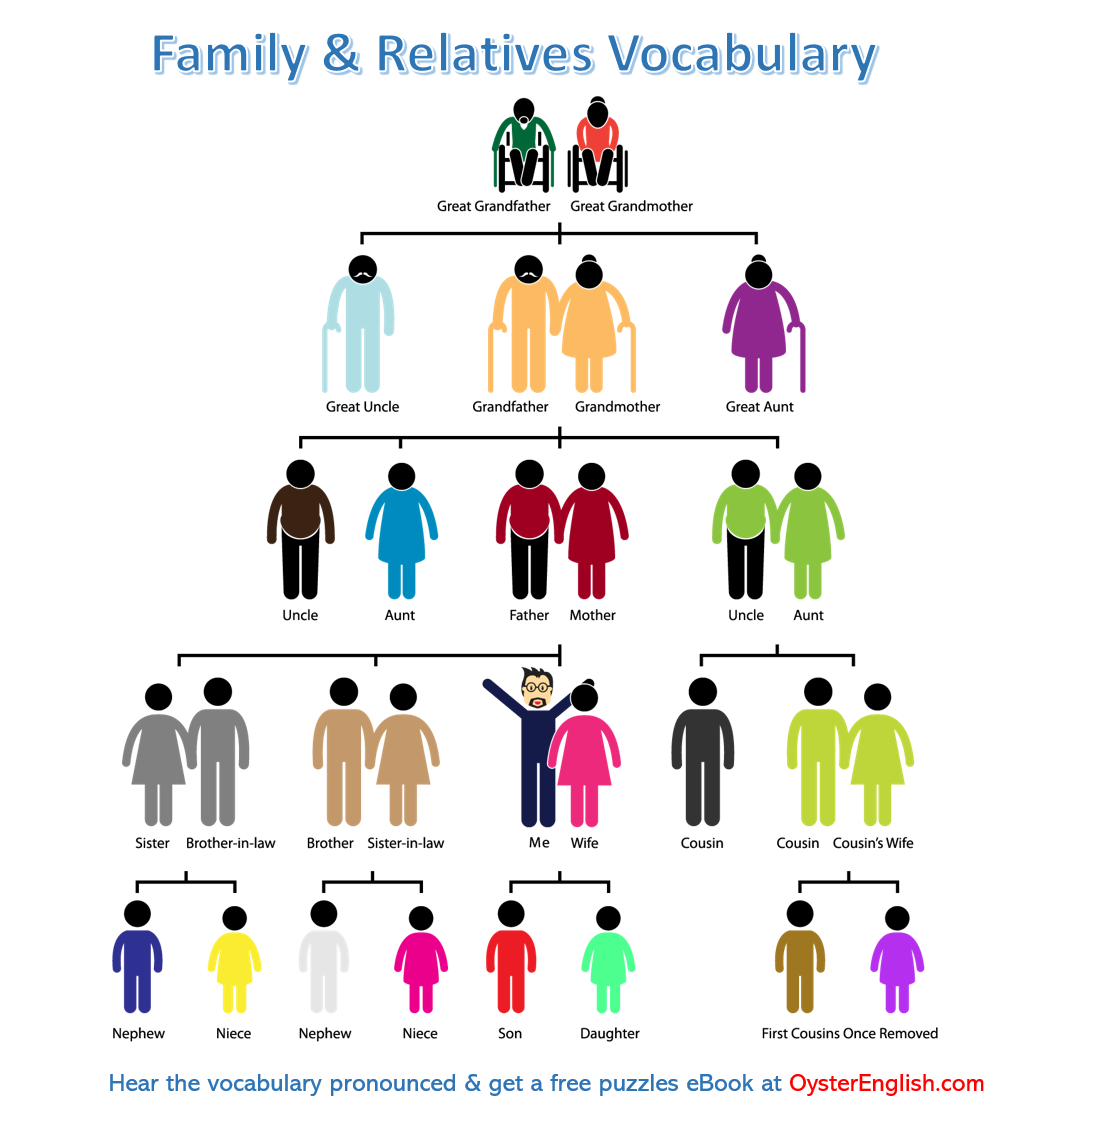 Related vocabulary. Family Vocabulary. Family Vocabulary английский. A member of the Family. Семья in English.